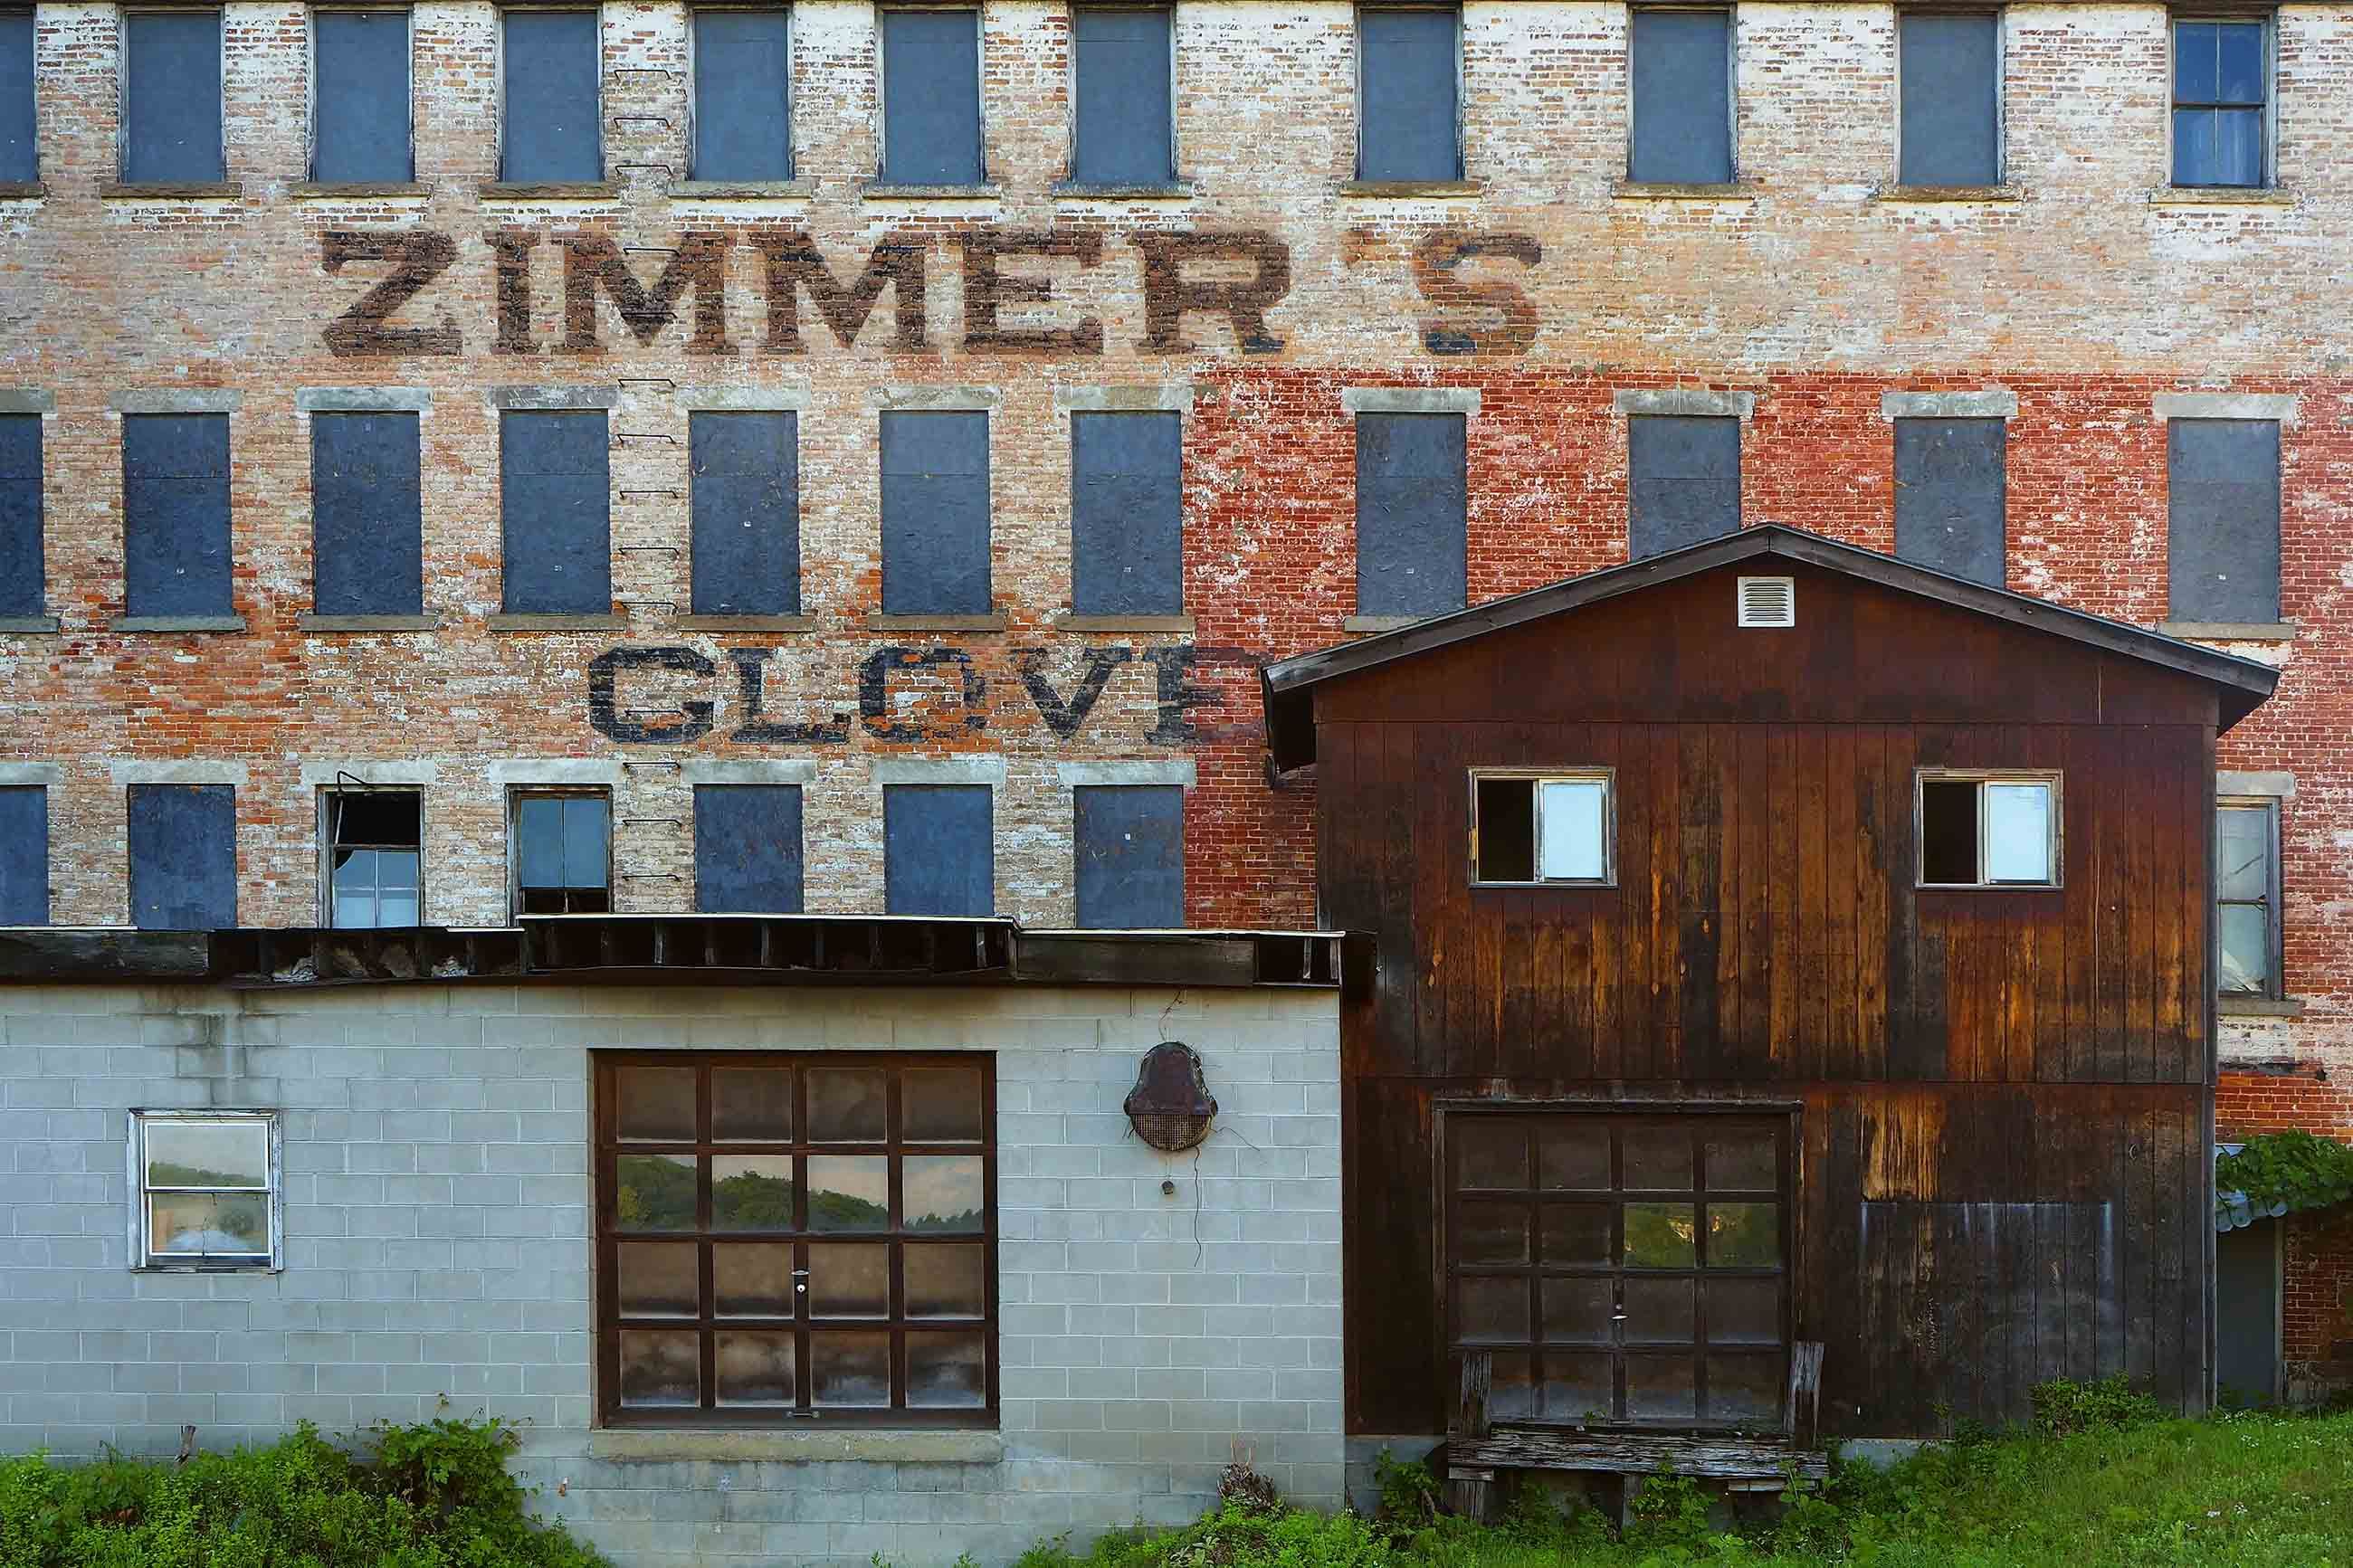 The ruins of the Zimmer and Son glove factory on South Arlington Avenue is a Gloversville, New York, landmark. For more than 100 years, leather tanning and glove making propelled the economy of this upstate New York town. Image by Larry C. Price. United States, 2016.